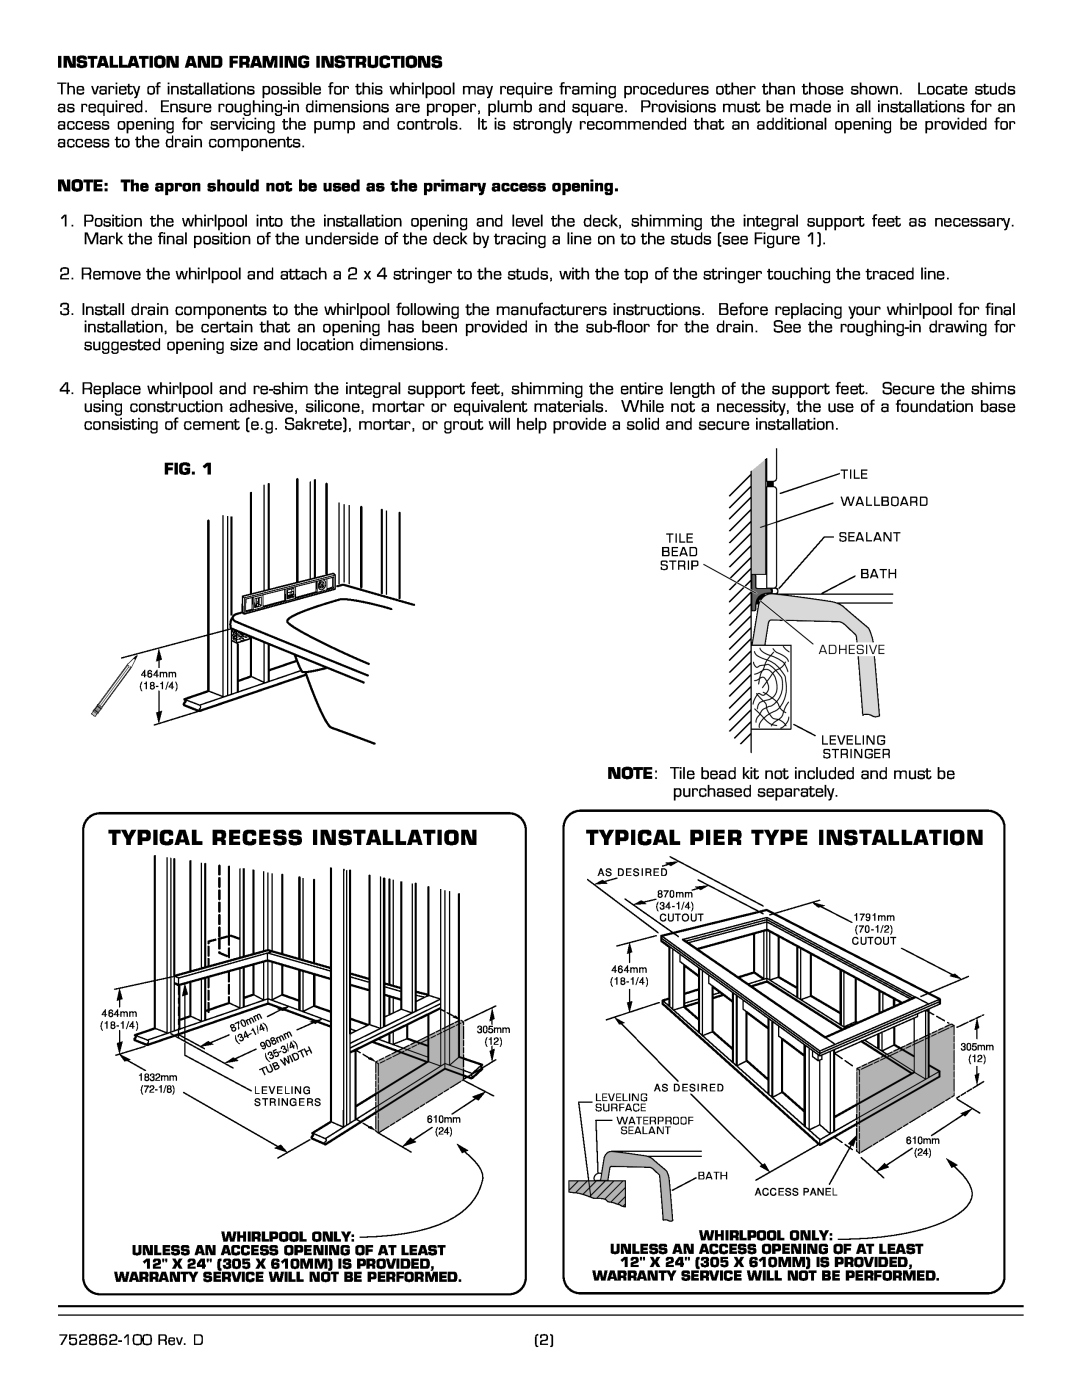 American Standard 2773E Series installation instructions Typical Recess Installation, Typical Pier Type Installation 